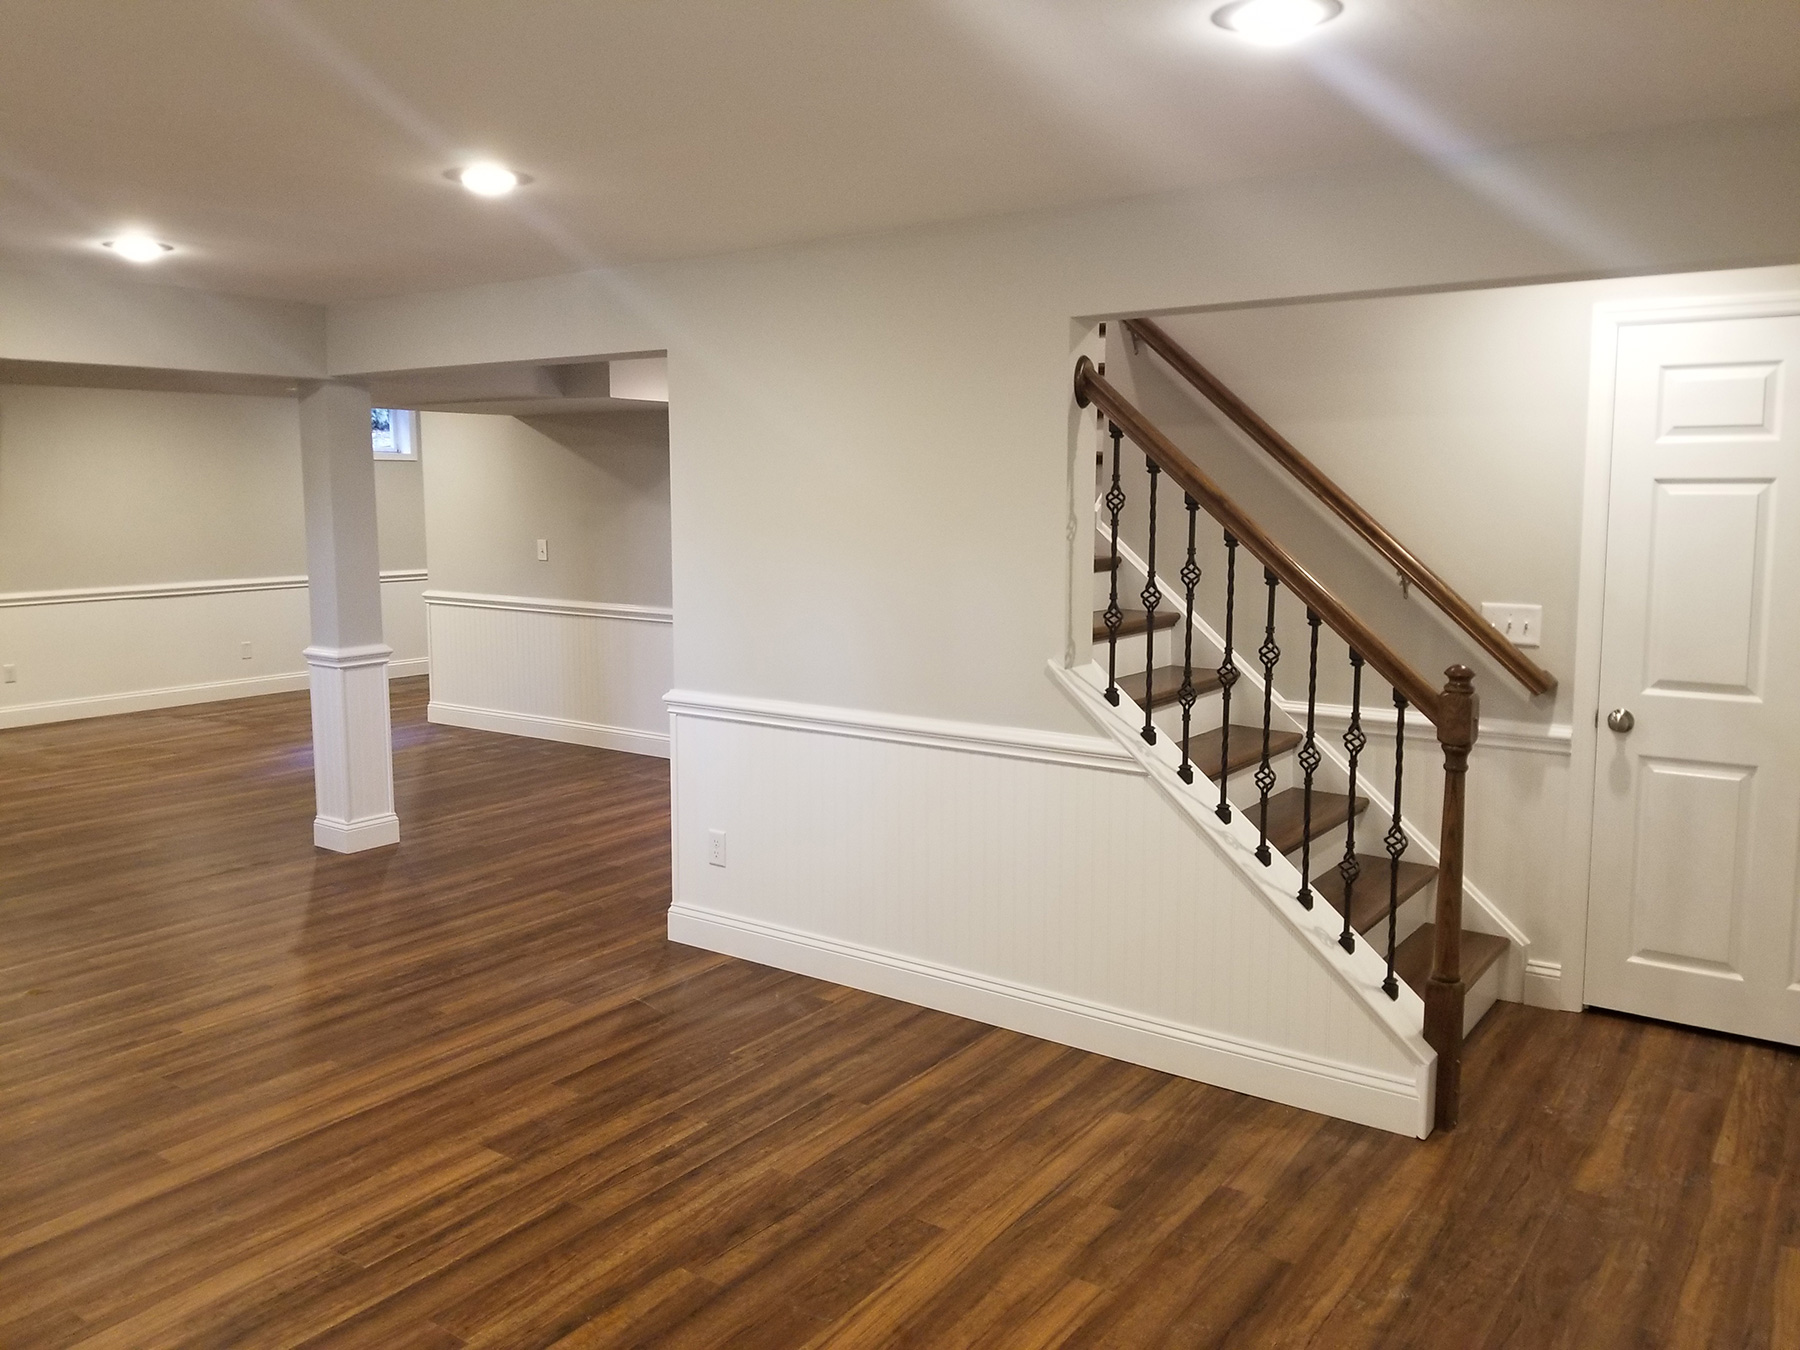 Reimagining a Basement Space in Wyomissing, PA